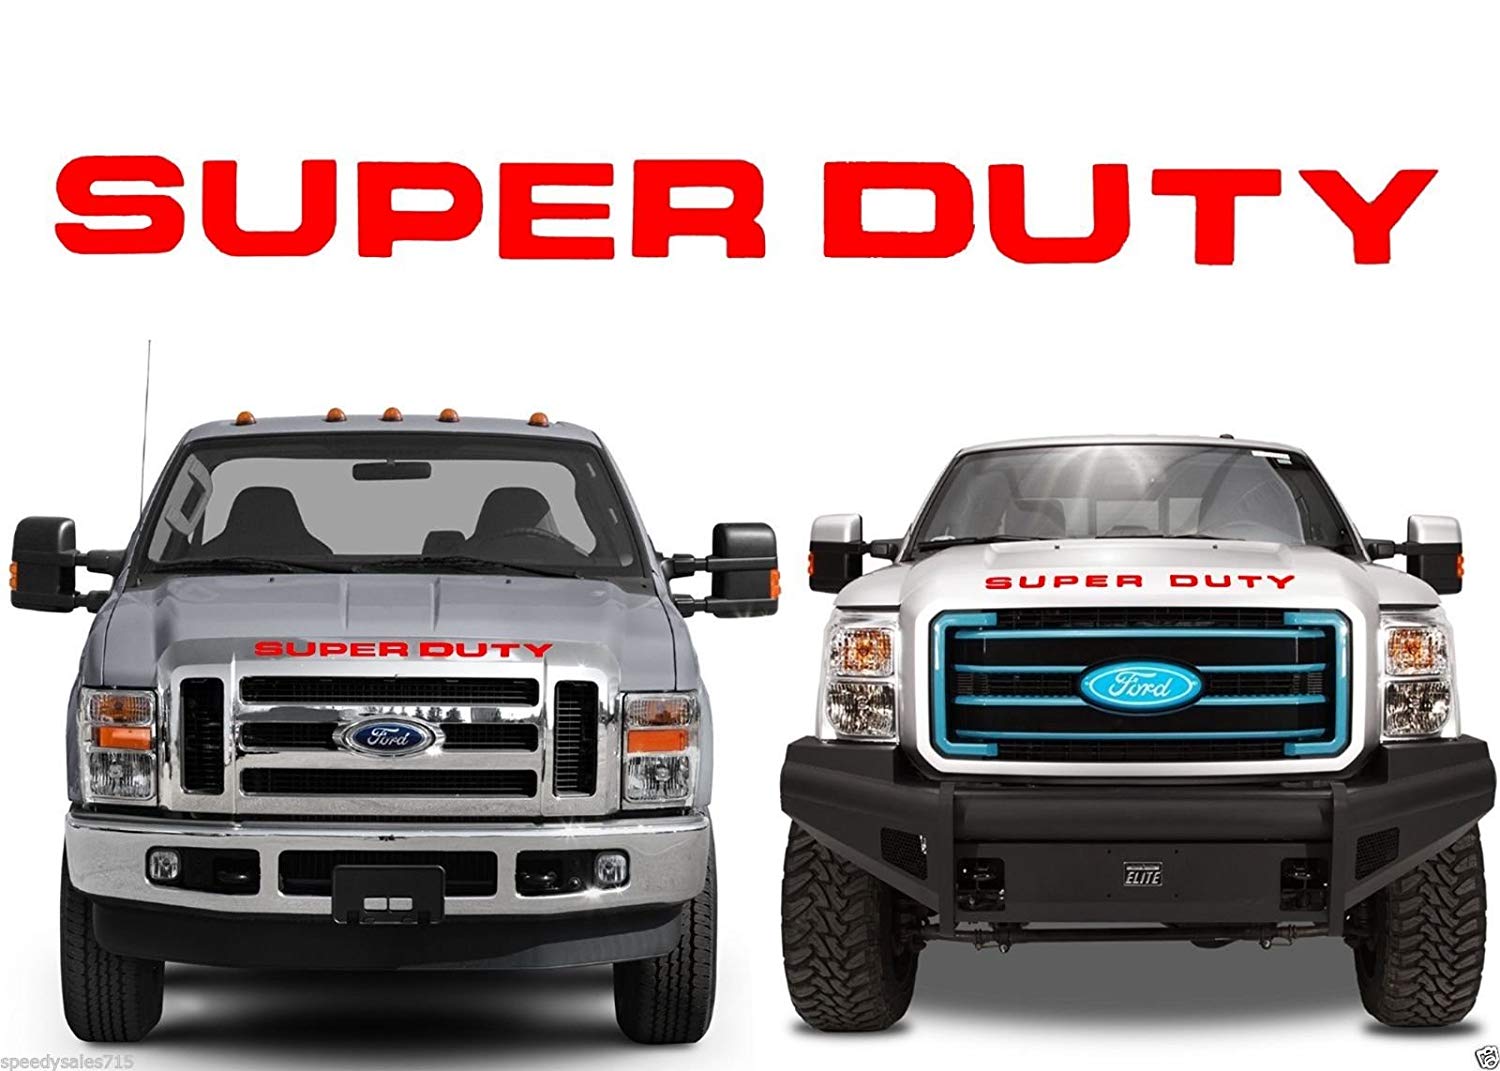 Flat Matte 2008-2016 Ford Super Duty Grille Insert Letters Decal Hood Grill 